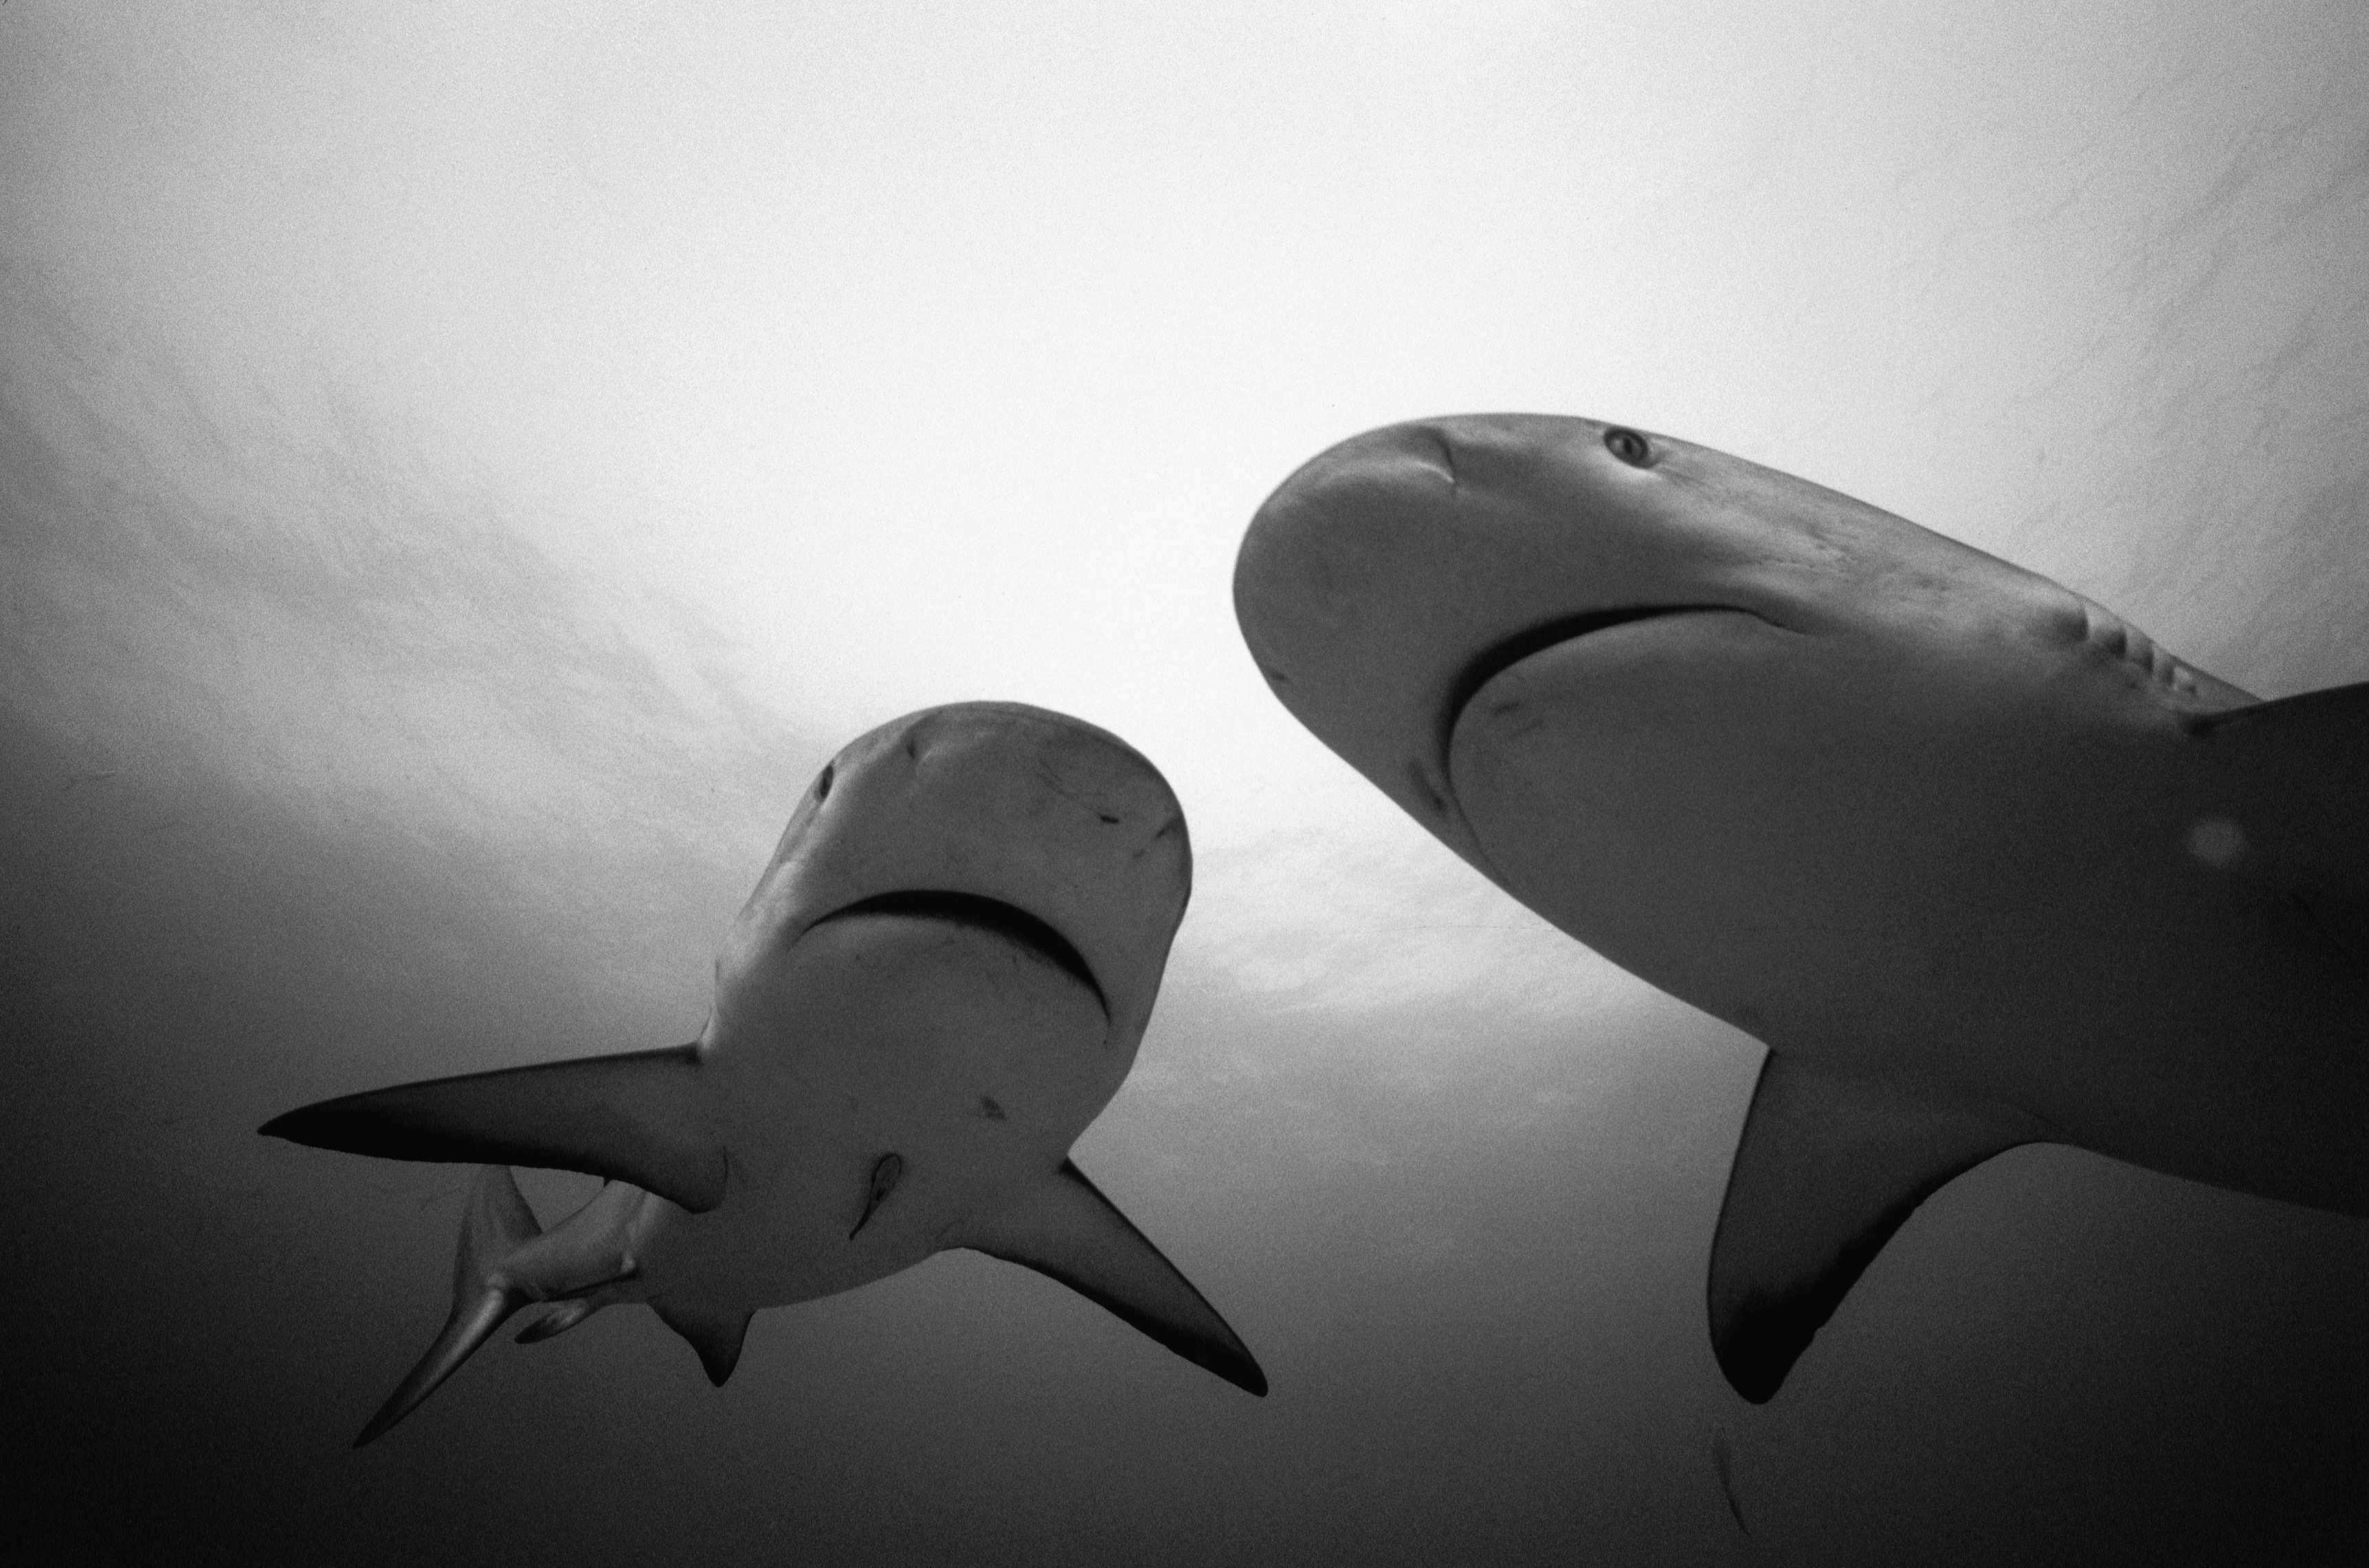 sharks, animals, pair, water, couple, bw, chb